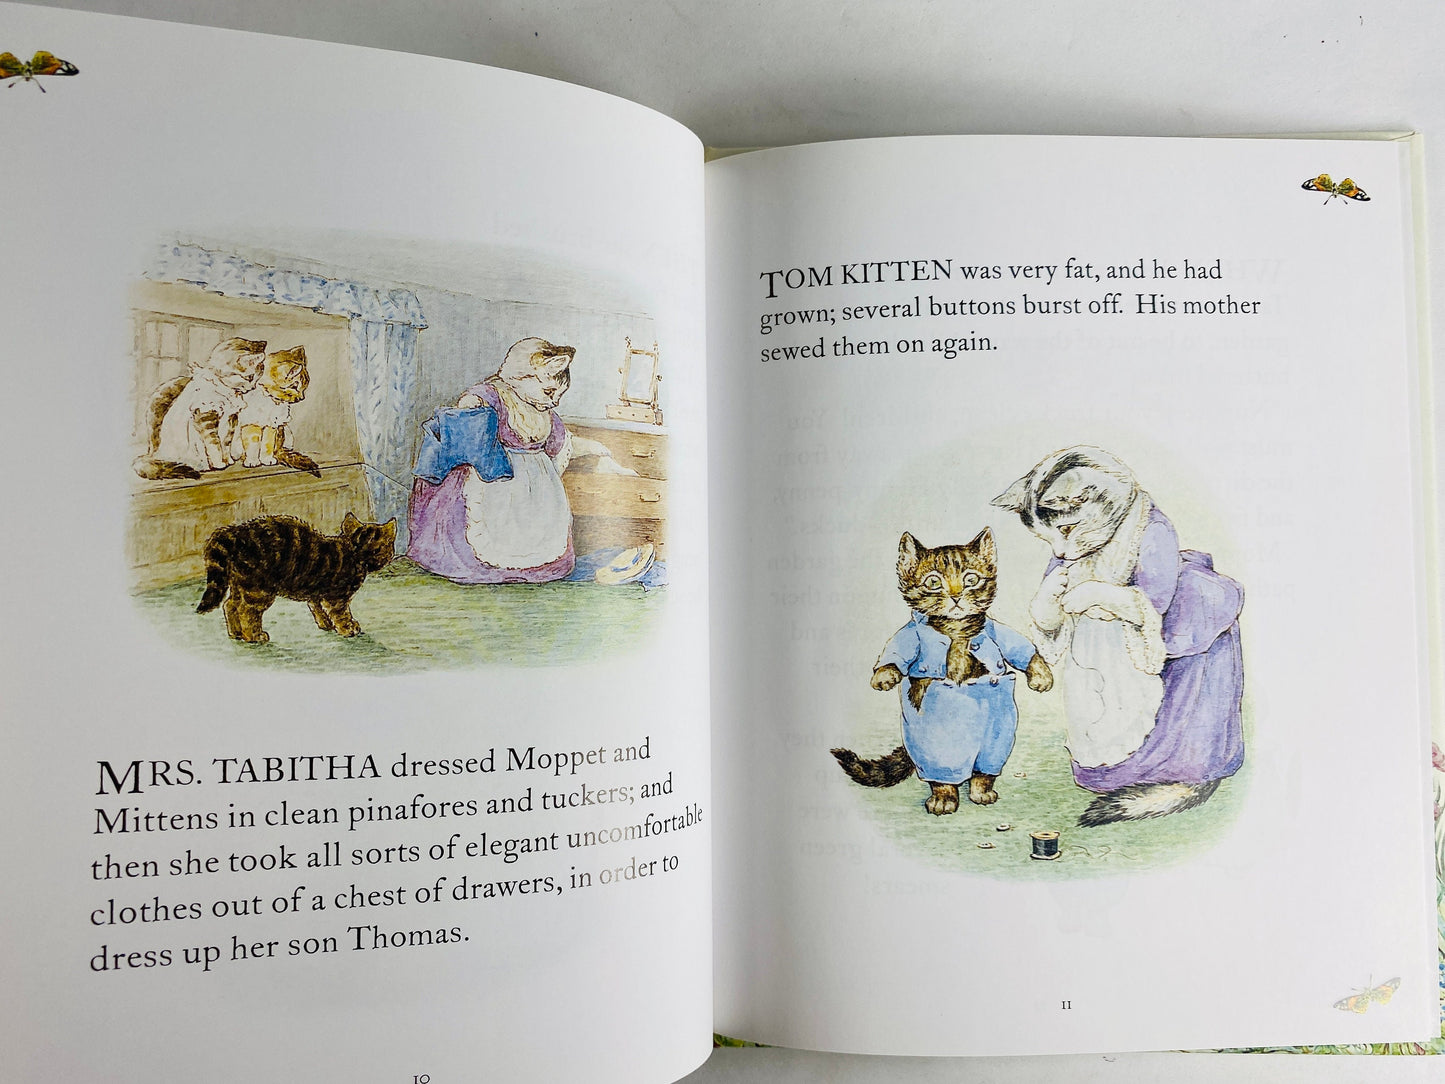 Beatrix Potter Tale of Peter Rabbit vintage children’s book Two Bad Mice Squirrel Nutkin Jemima Puddle Duck Flopsy Bunnies Tailor Gloucester